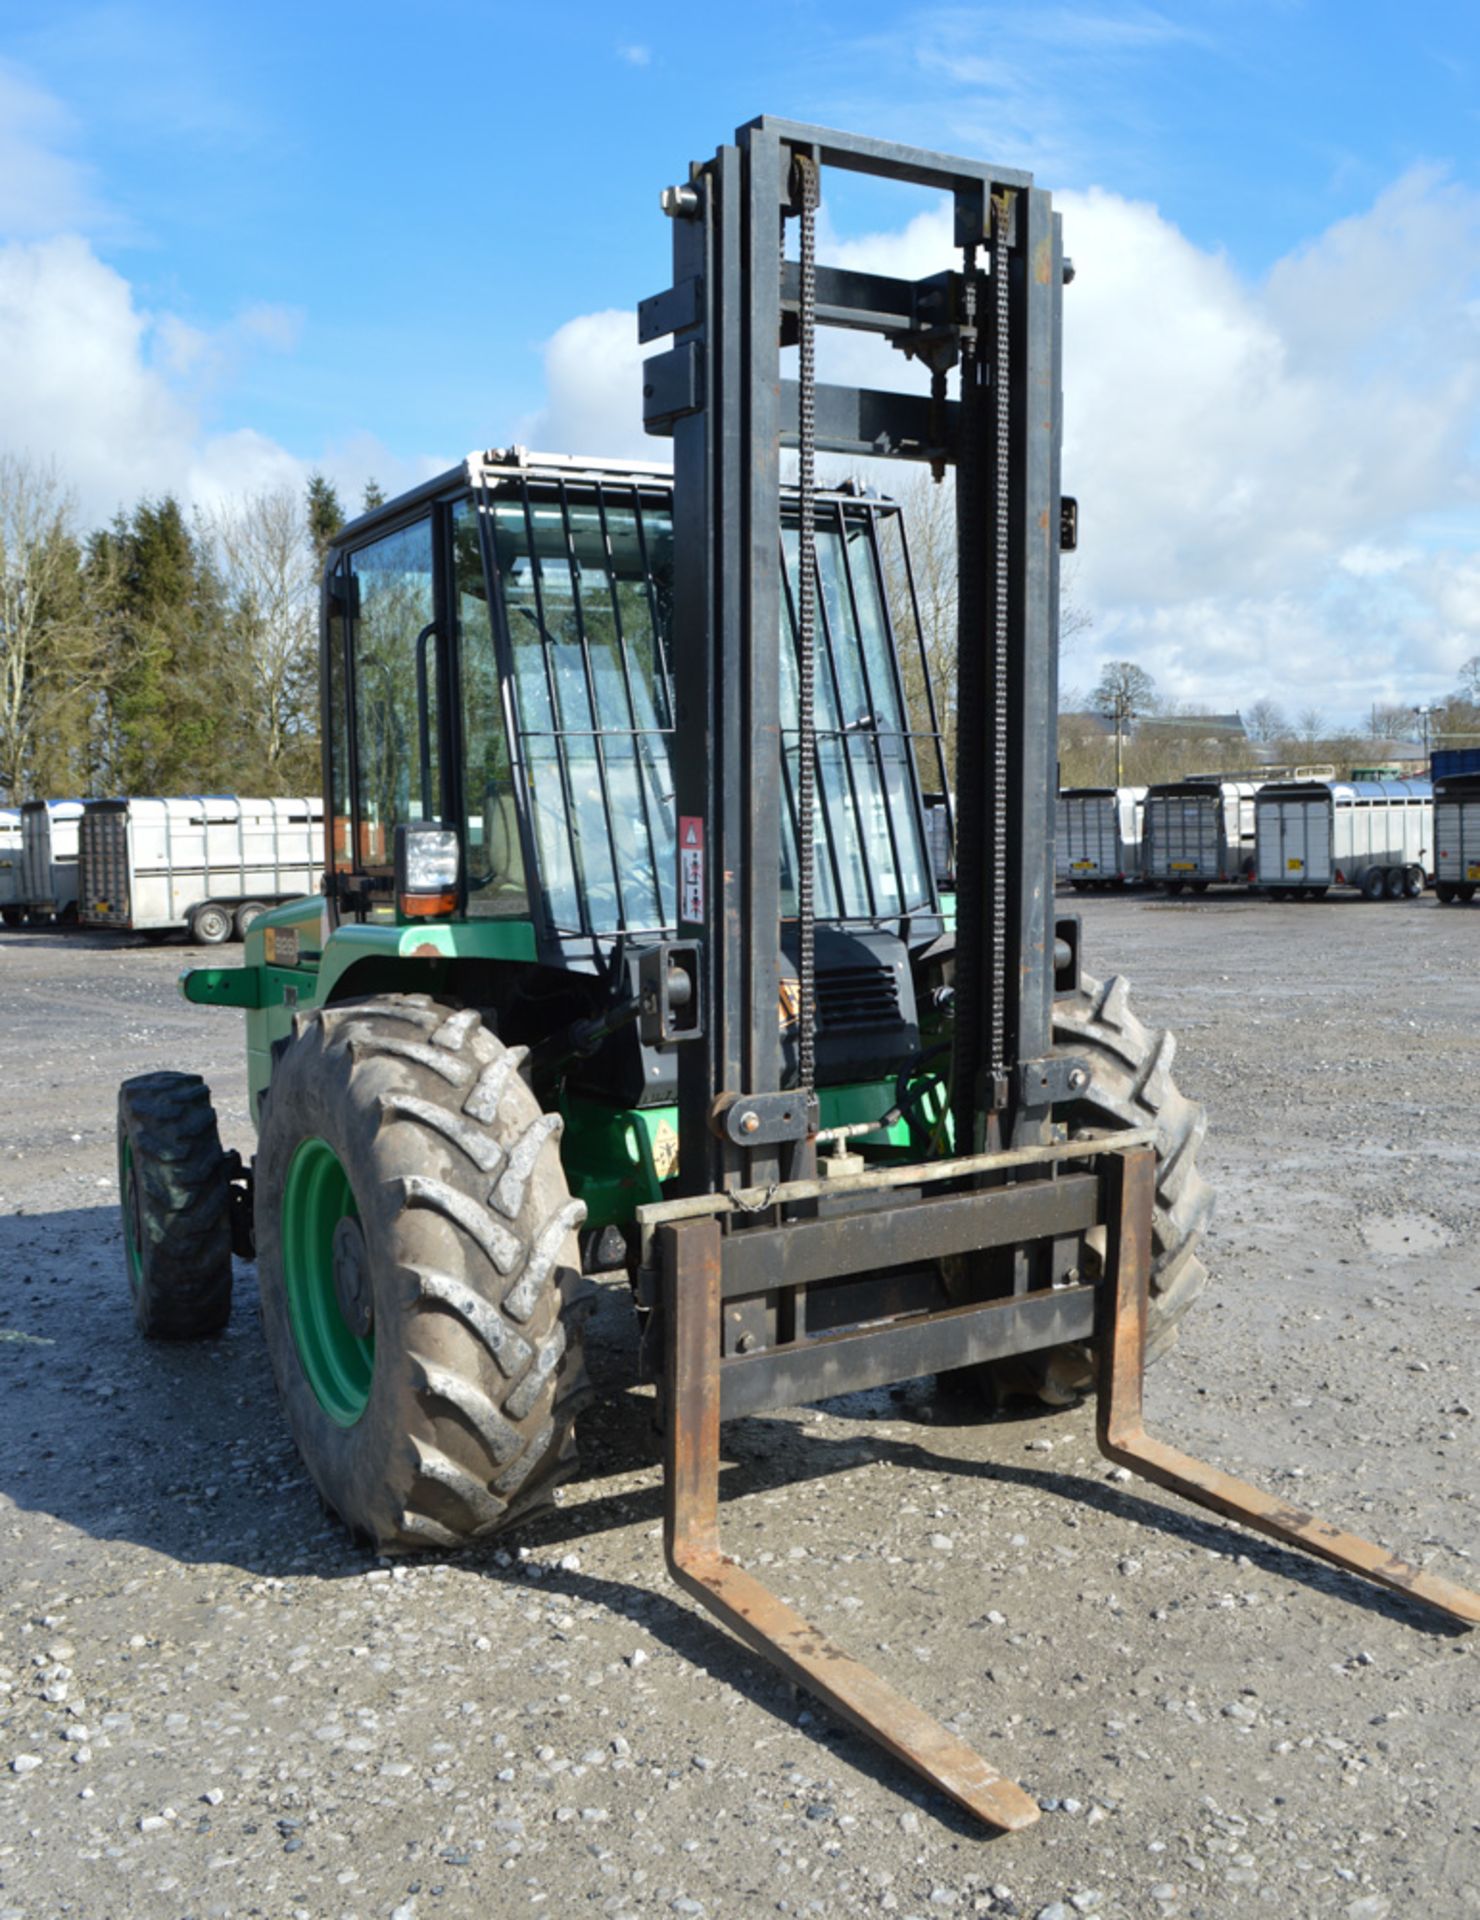 JCB 926 rough terrain fork lift truck Year: 2008 S/N: 1281489 Recorded Hours: 2188 A503849 - Image 4 of 12